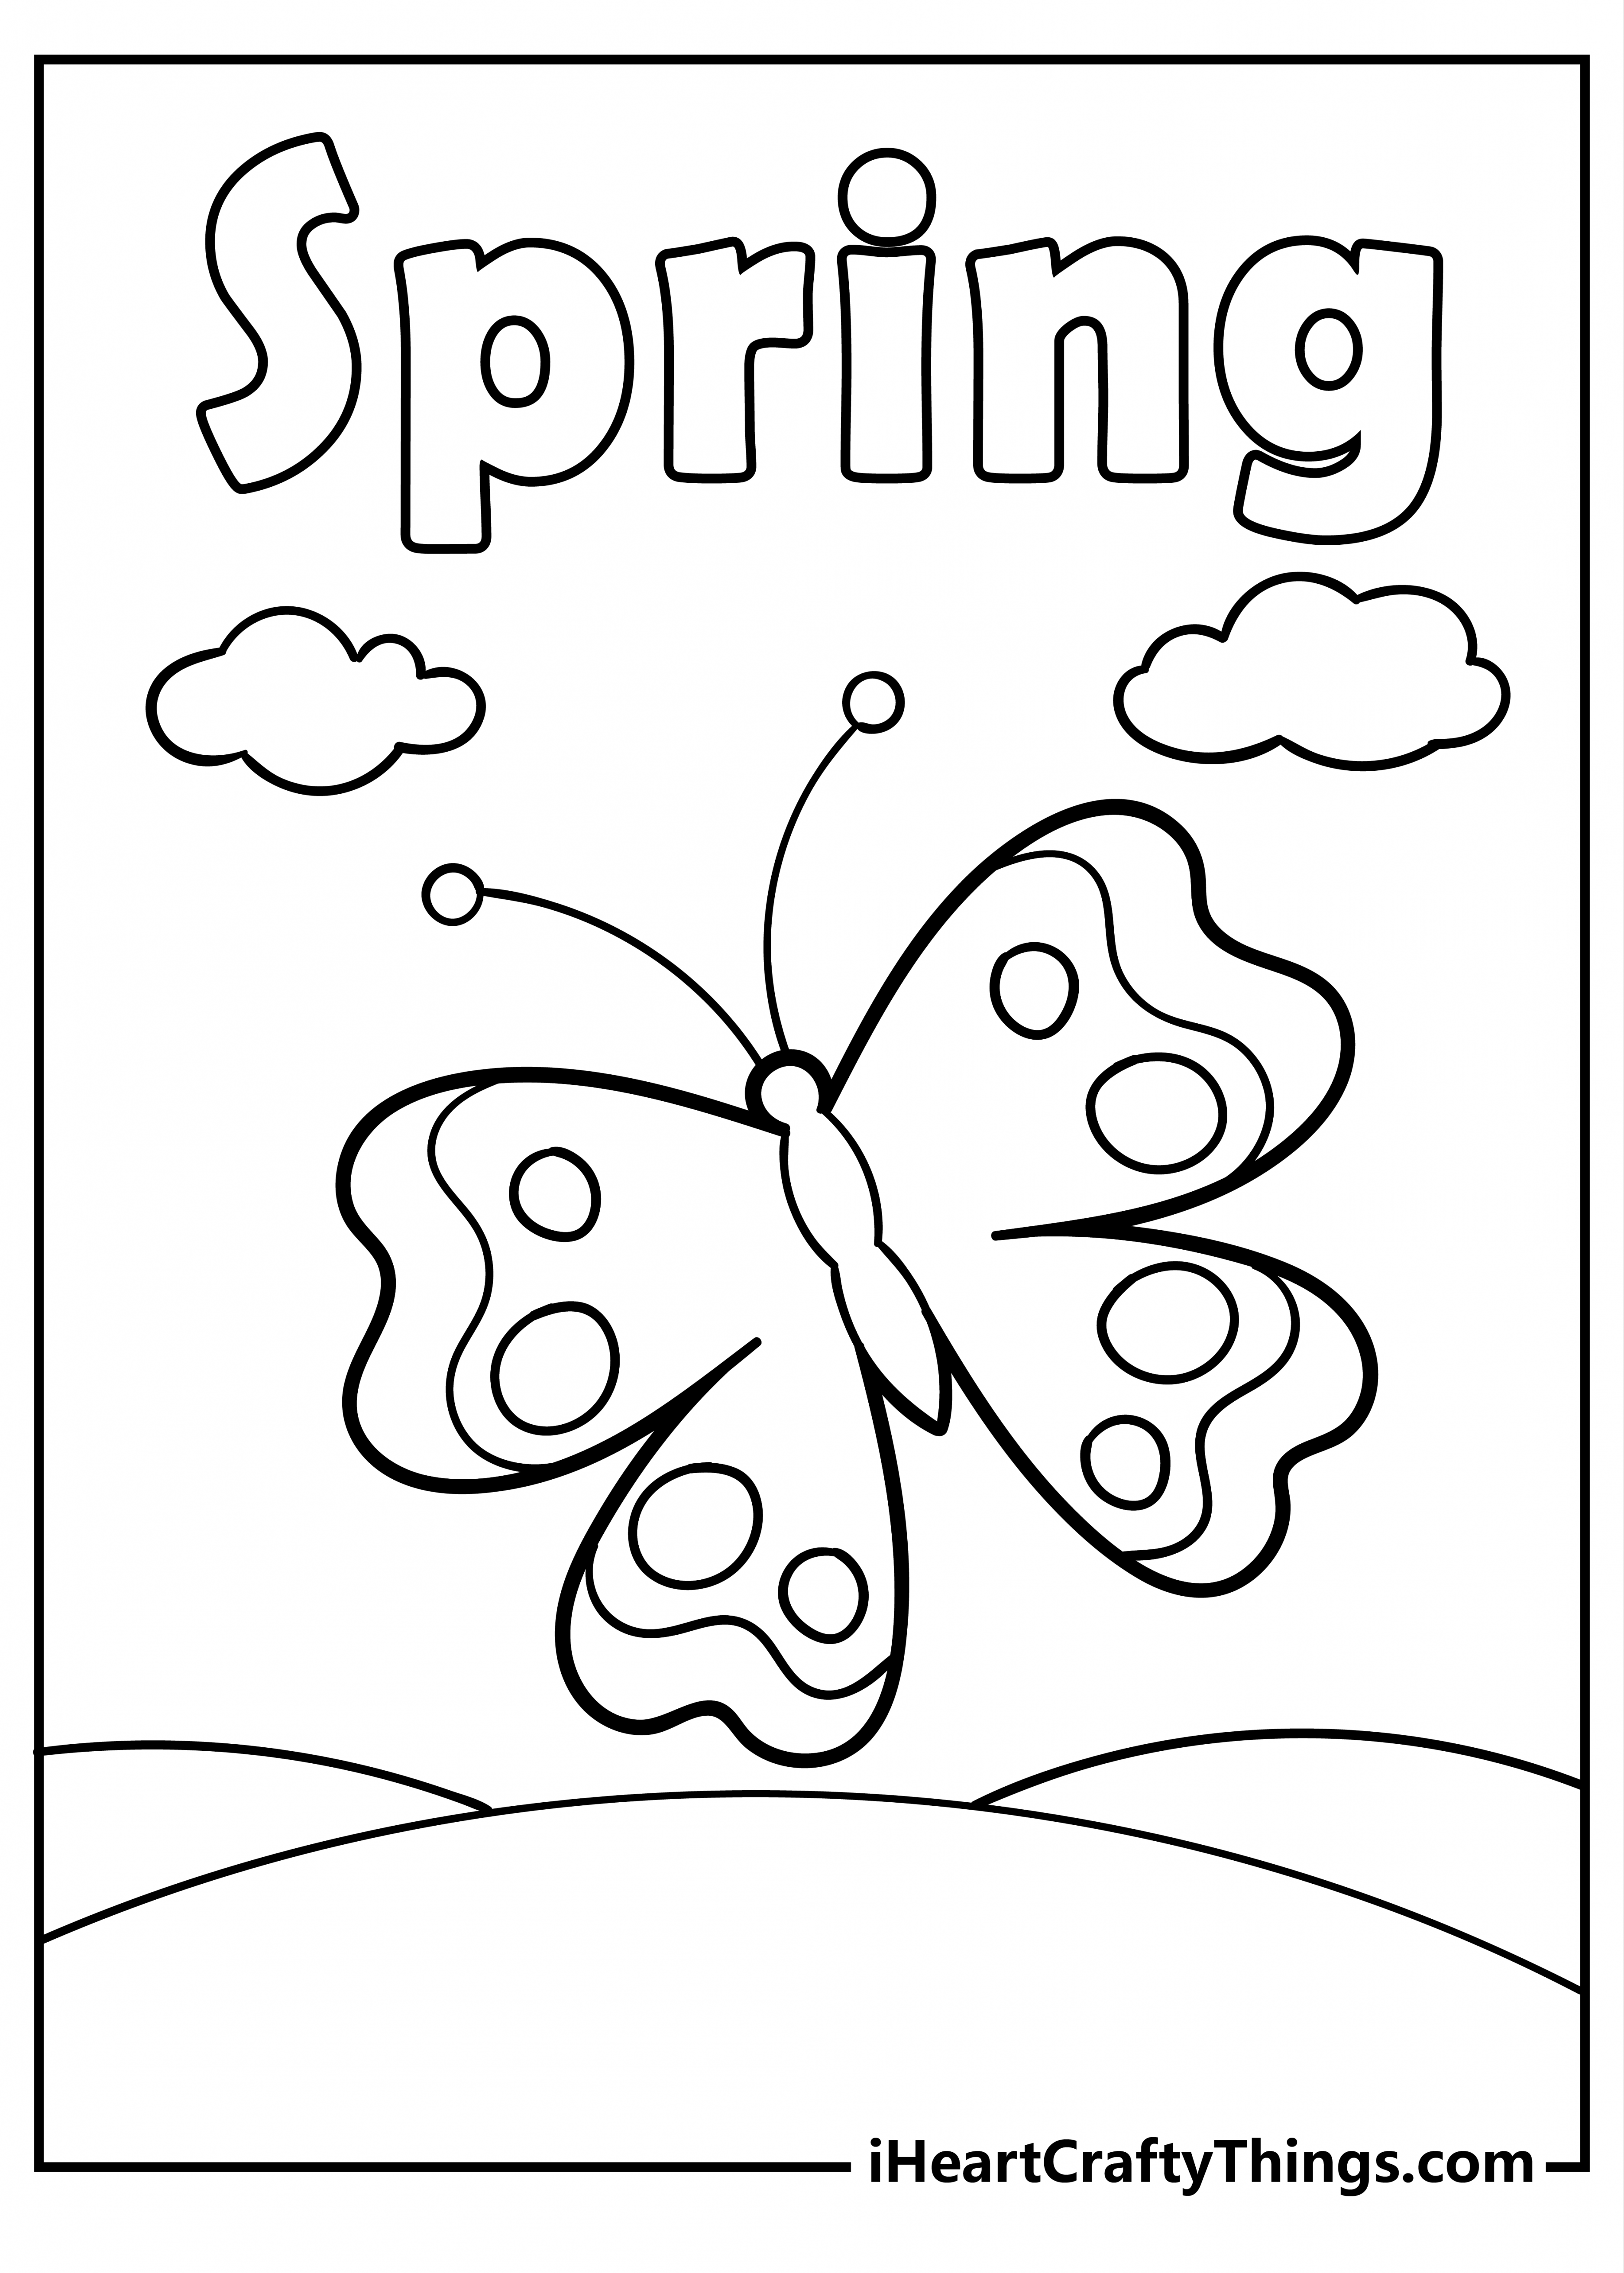 Free Printable Spring Coloring Pages - Printable - Printable Spring Coloring Pages (Updated )